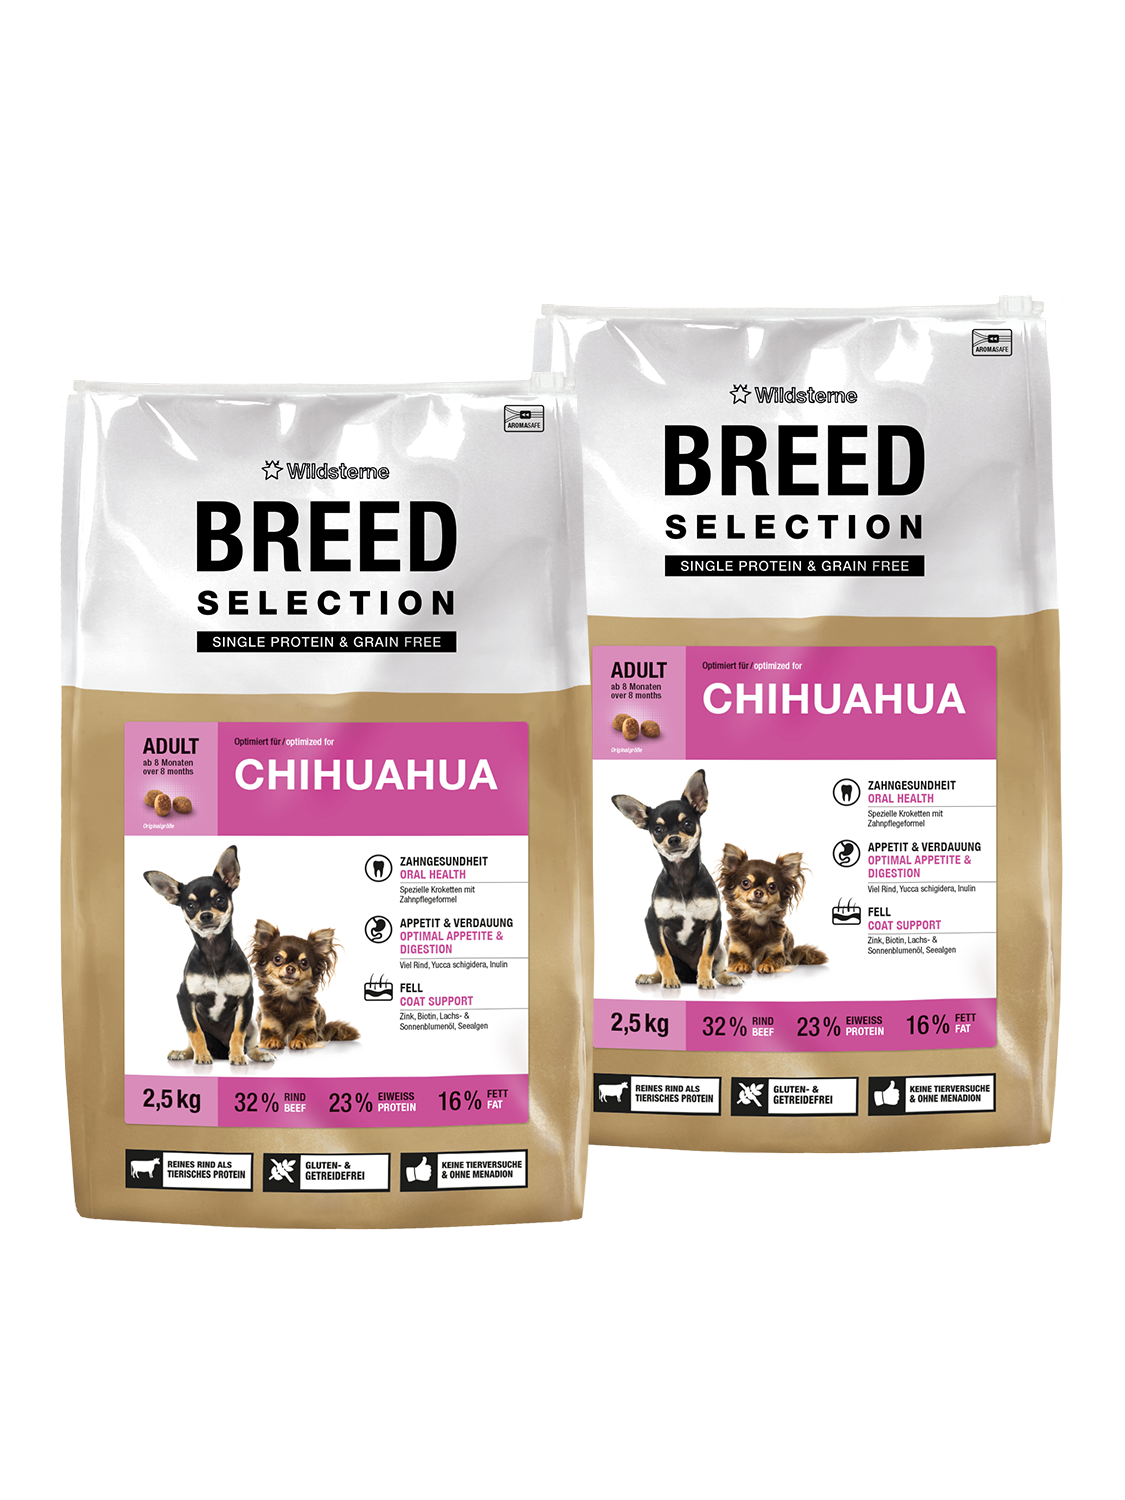 Vorteilspack Breed Selection Chihuahua 2 x 2.5kg